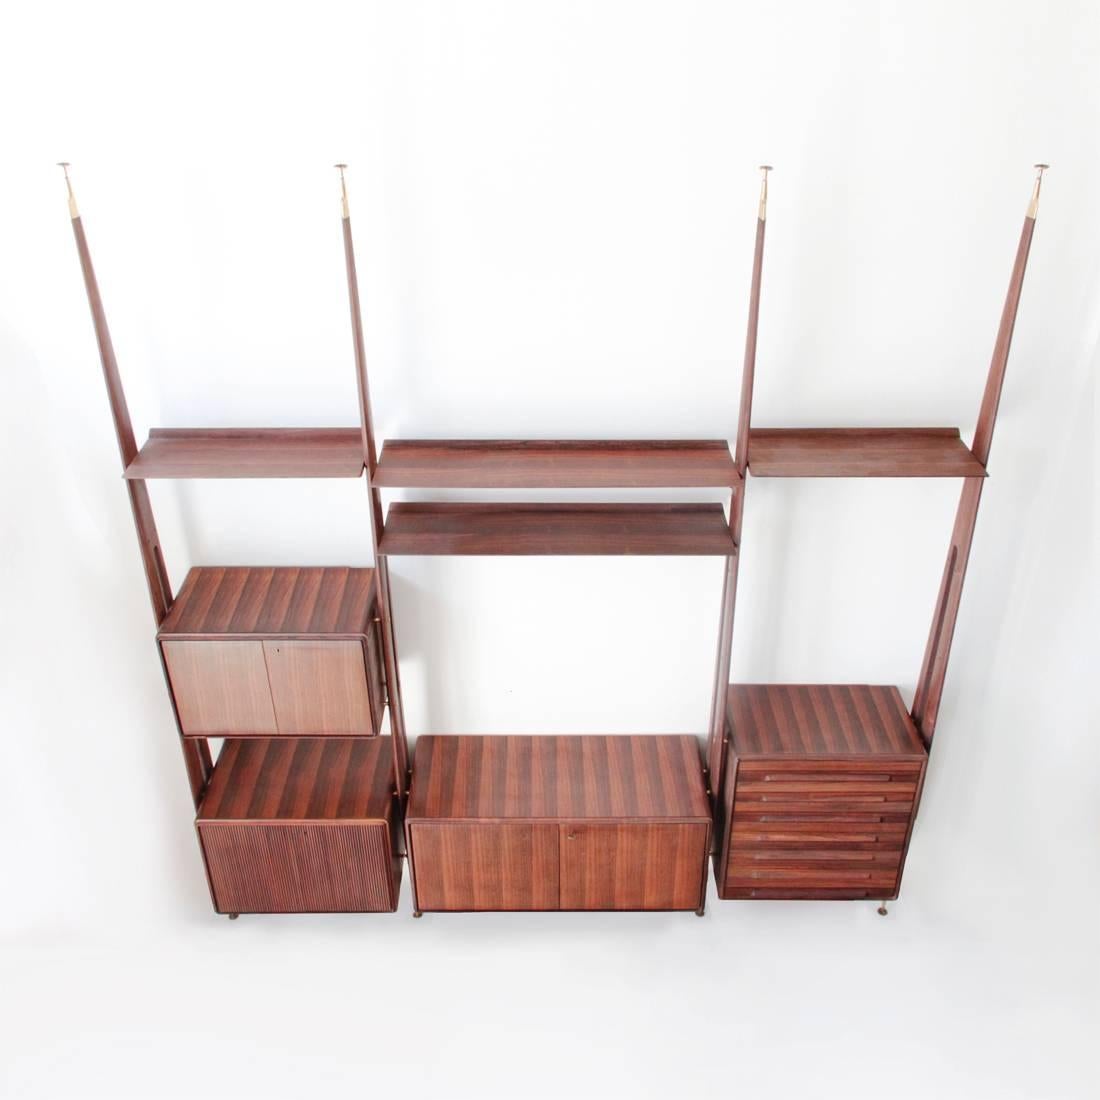 This rosewood wall system was produced by Galleria Mobili d'Arte Cantù. The unit is composed of three modules: The left one has two cabinets and a shelf; the central, bigger one features a cupboard with two doors and two shelves; and the last